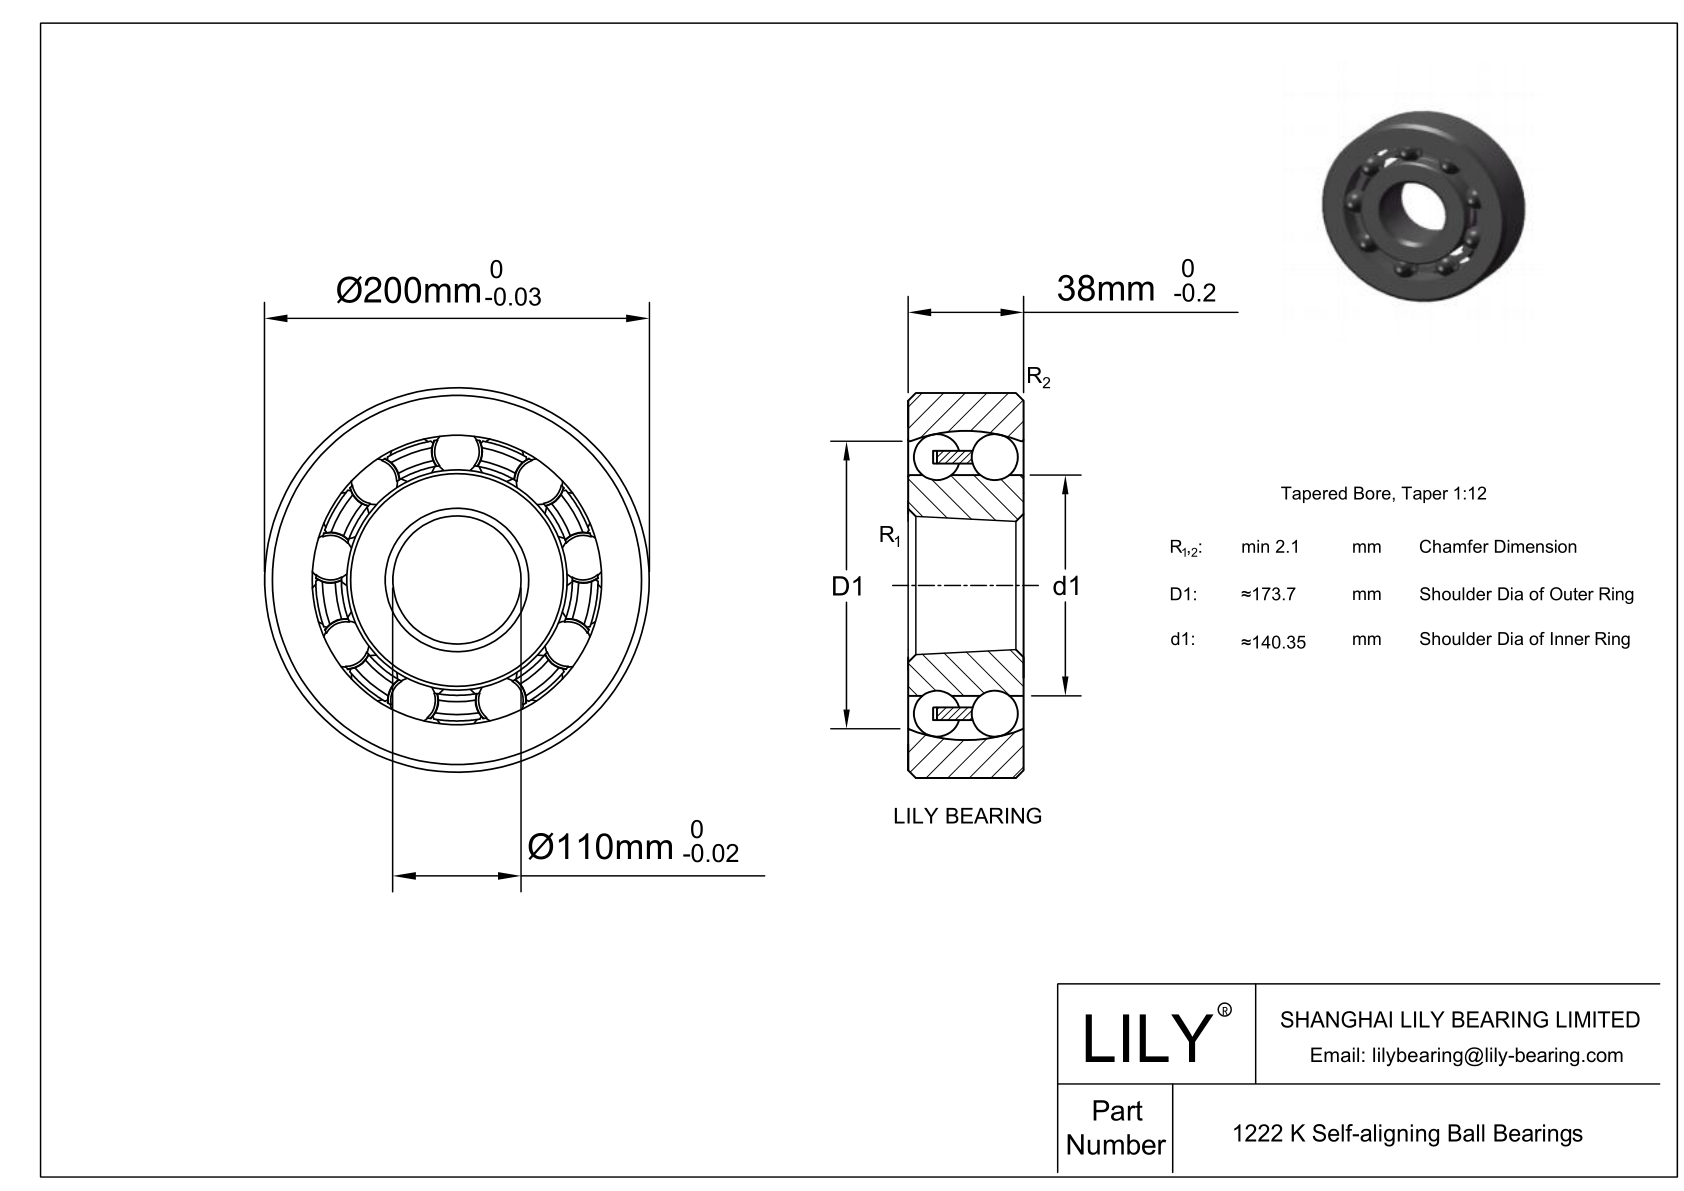 S1222 K Stainless Steel Self Aligning Ball Bearings cad drawing